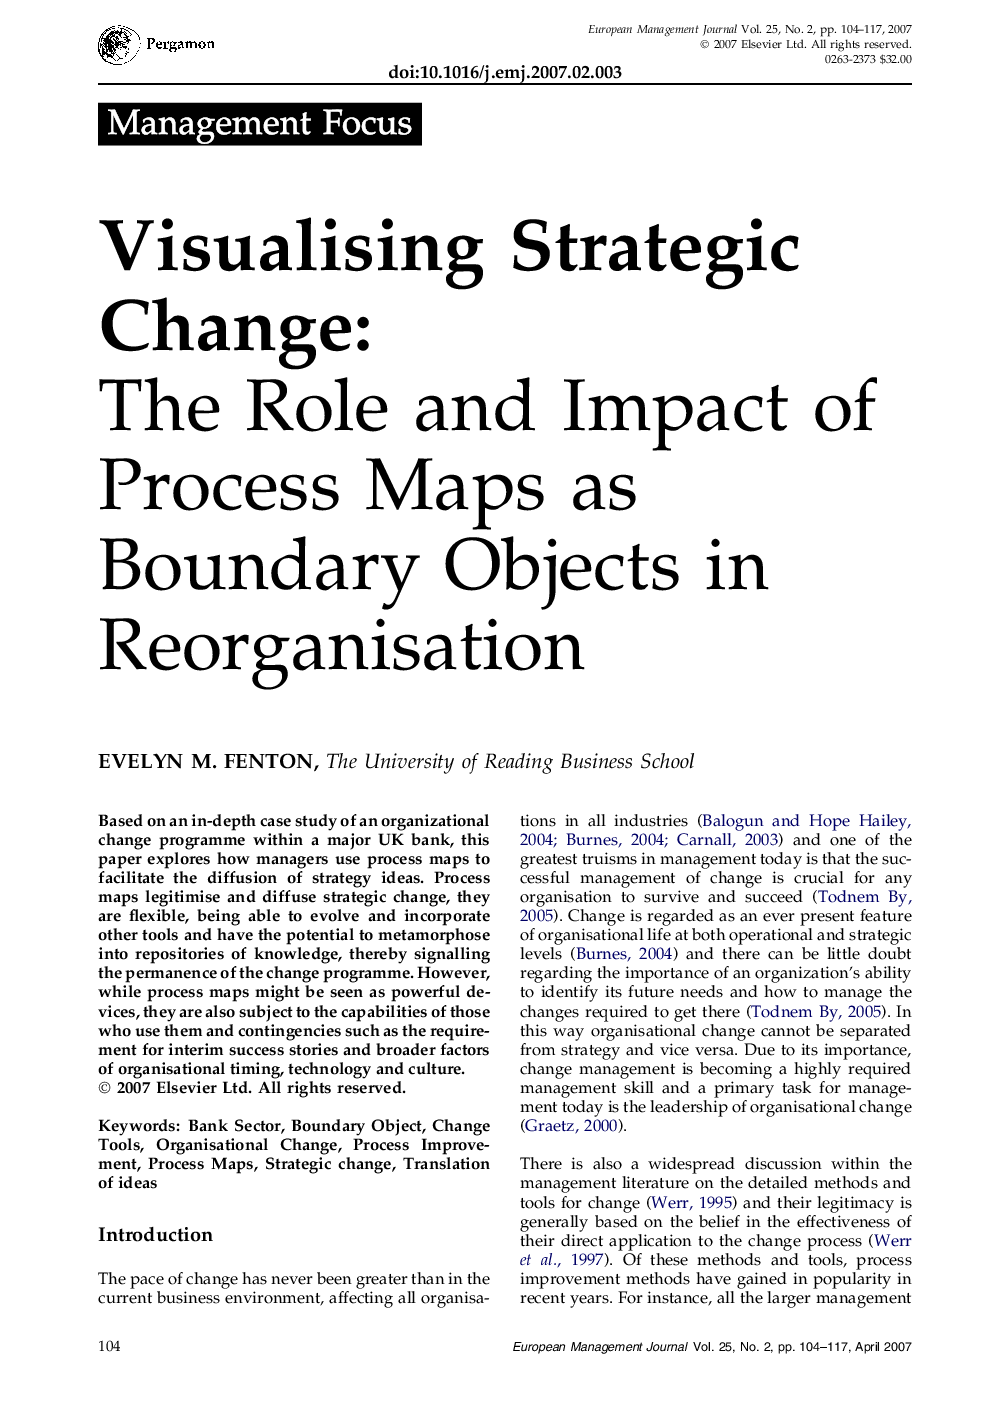 Visualising Strategic Change:: The Role and Impact of Process Maps as Boundary Objects in Reorganisation